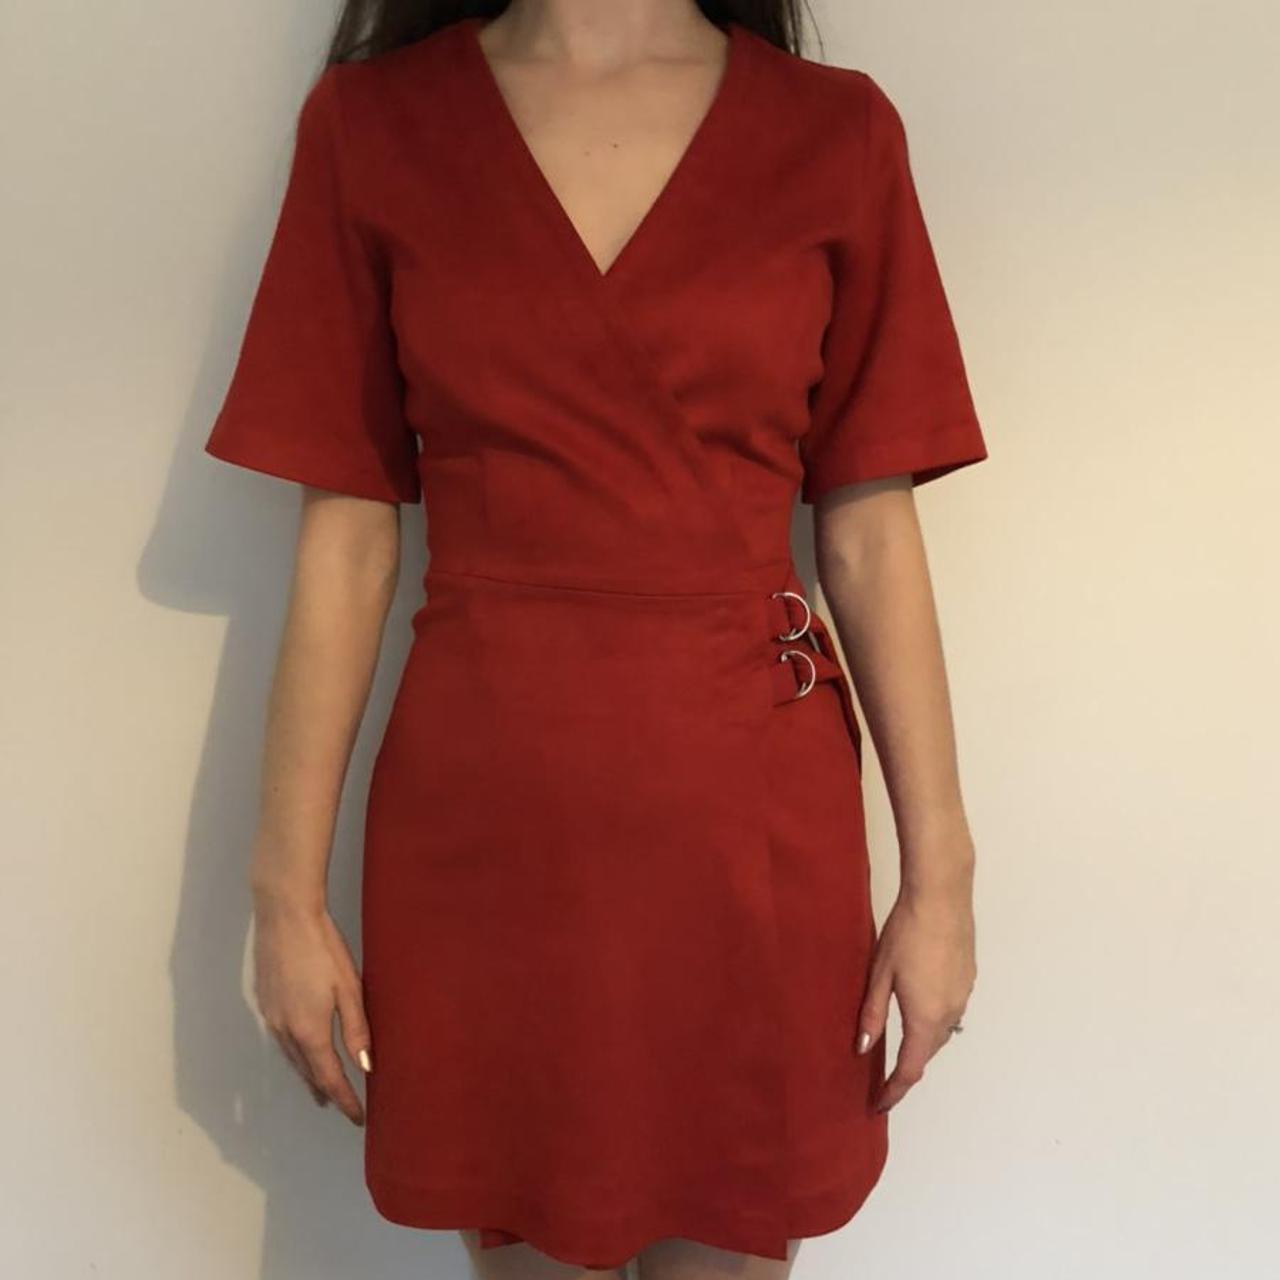 Red Zara suede wrap dress 
</p>
<div class='sfsiaftrpstwpr'><div class='sfsi_responsive_icons' style='display:block;margin-top:10px; margin-bottom: 10px; width:100%' data-icon-width-type='Fully responsive' data-icon-width-size='240' data-edge-type='Round' data-edge-radius='5'  ><div class='sfsi_icons_container sfsi_responsive_without_counter_icons sfsi_medium_button_container sfsi_icons_container_box_fully_container ' style='width:100%;display:flex; text-align:center;' ><a target='_blank' href='https://www.facebook.com/sharer/sharer.php?u=https%3A%2F%2Fwww.dresses2022.com%2Fsuede-wrap-dress%2F' style='display:block;text-align:center;margin-left:10px;  flex-basis:100%;' class=sfsi_responsive_fluid ><div class='sfsi_responsive_icon_item_container sfsi_responsive_icon_facebook_container sfsi_medium_button sfsi_responsive_icon_gradient sfsi_centered_icon' style=' border-radius:5px; width:auto; ' ><img style='max-height: 25px;display:unset;margin:0' class='sfsi_wicon' alt='facebook' src='https://www.dresses2022.com/wp-content/plugins/ultimate-social-media-icons/images/responsive-icon/facebook.svg'><span style='color:#fff'>Share on Facebook</span></div></a><a target='_blank' href='https://twitter.com/intent/tweet?text=Hey%2C+check+out+this+cool+site+I+found%3A+www.yourname.com+%23Topic+via%40my_twitter_name&url=https%3A%2F%2Fwww.dresses2022.com%2Fsuede-wrap-dress%2F' style='display:block;text-align:center;margin-left:10px;  flex-basis:100%;' class=sfsi_responsive_fluid ><div class='sfsi_responsive_icon_item_container sfsi_responsive_icon_twitter_container sfsi_medium_button sfsi_responsive_icon_gradient sfsi_centered_icon' style=' border-radius:5px; width:auto; ' ><img style='max-height: 25px;display:unset;margin:0' class='sfsi_wicon' alt='Twitter' src='https://www.dresses2022.com/wp-content/plugins/ultimate-social-media-icons/images/responsive-icon/Twitter.svg'><span style='color:#fff'>Tweet</span></div></a><a target='_blank' href='https://follow.it/now' style='display:block;text-align:center;margin-left:10px;  flex-basis:100%;' class=sfsi_responsive_fluid ><div class='sfsi_responsive_icon_item_container sfsi_responsive_icon_follow_container sfsi_medium_button sfsi_responsive_icon_gradient sfsi_centered_icon' style=' border-radius:5px; width:auto; ' ><img style='max-height: 25px;display:unset;margin:0' class='sfsi_wicon' alt='Follow' src='https://www.dresses2022.com/wp-content/plugins/ultimate-social-media-icons/images/responsive-icon/Follow.png'><span style='color:#fff'>Follow us</span></div></a><a target='_blank' href='https://www.pinterest.com/pin/create/link/?url=https%3A%2F%2Fwww.dresses2022.com%2Fsuede-wrap-dress%2F' style='display:block;text-align:center;margin-left:10px;  flex-basis:100%;' class=sfsi_responsive_fluid ><div class='sfsi_responsive_icon_item_container sfsi_responsive_icon_pinterest_container sfsi_medium_button sfsi_responsive_icon_gradient sfsi_centered_icon' style=' border-radius:5px; width:auto; ' ><img style='max-height: 25px;display:unset;margin:0' class='sfsi_wicon' alt='Pinterest' src='https://www.dresses2022.com/wp-content/plugins/ultimate-social-media-icons/images/responsive-icon/Pinterest.svg'><span style='color:#fff'>Save</span></div></a></div></div></div><!--end responsive_icons--><div class=